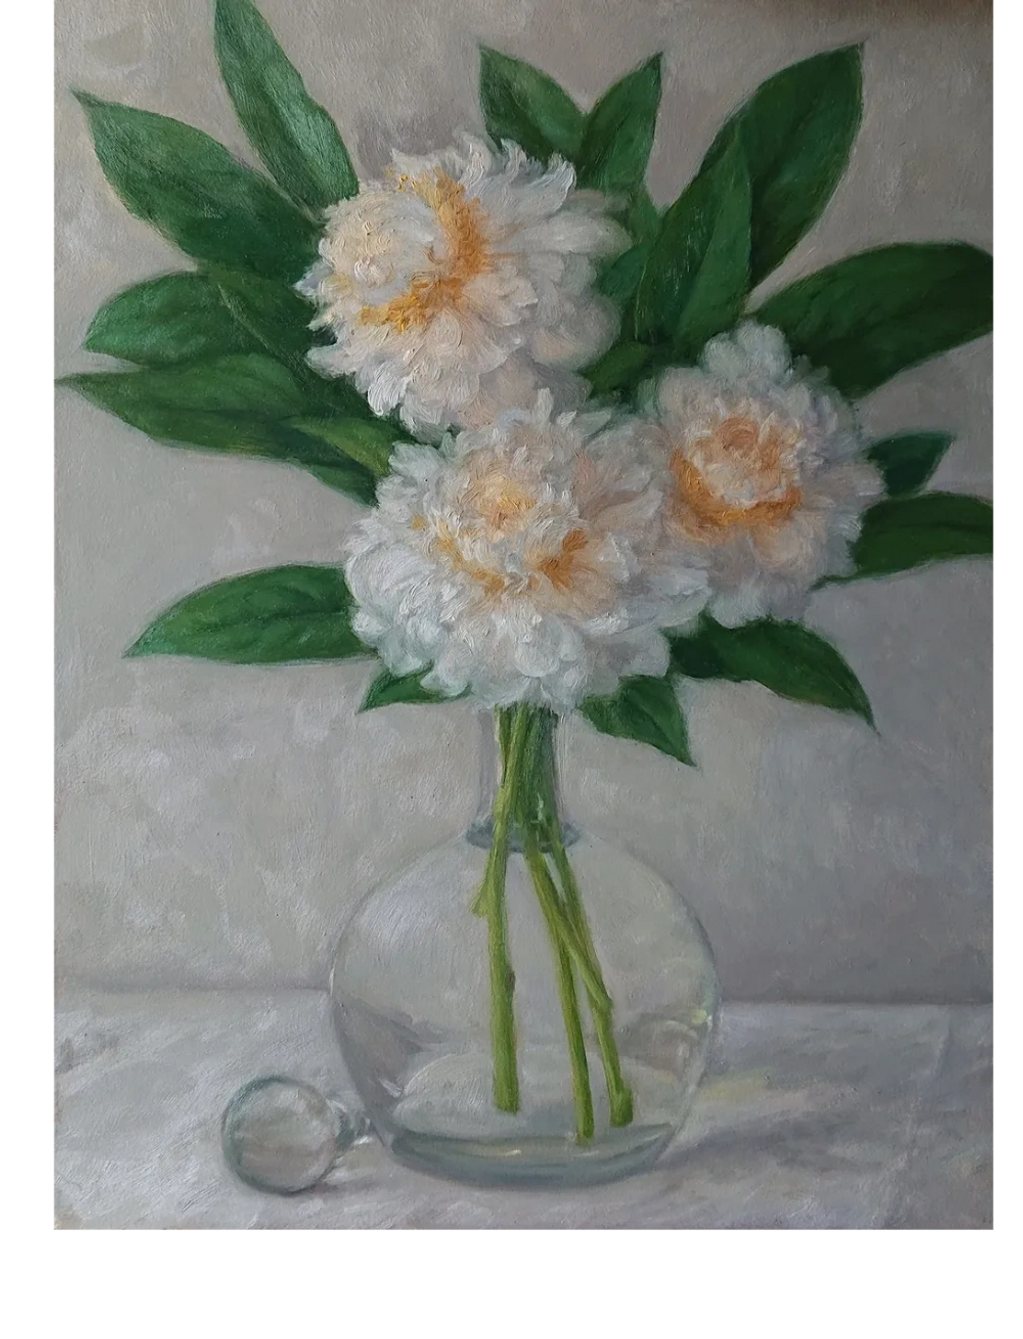 White peonies in a glass decanter on a white tablecloth.